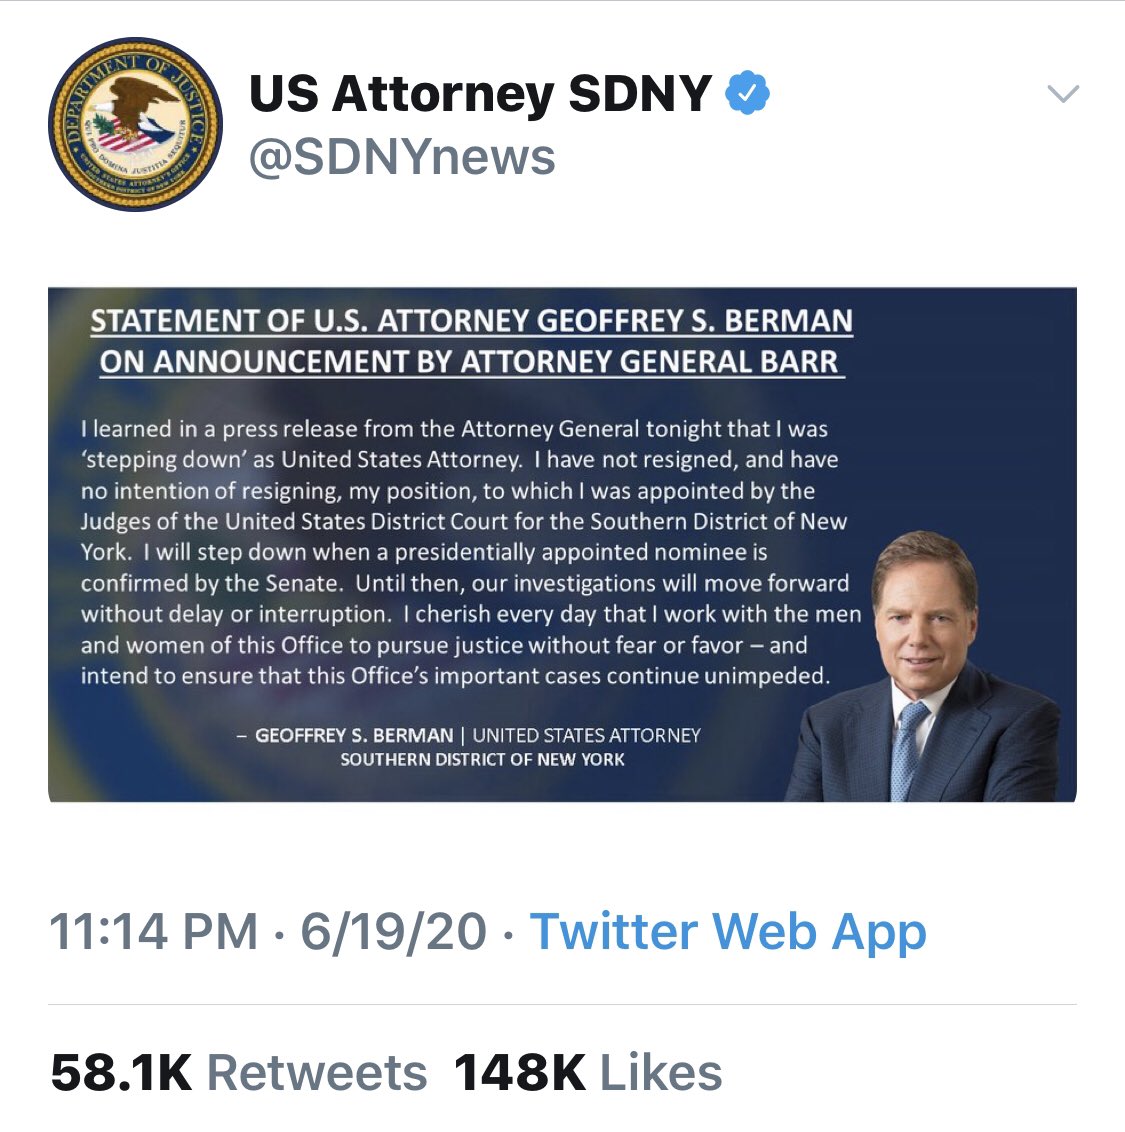 4484   https://twitter.com/TheJusticeDept/status/127414876476945203  https://twitter.com/SDNYnews/status/1274178732476059650THE GUARD REFUSING TO STEP DOWN?POTUS refusal to formally nominate? APPOINTED TO POST BY SDNY JUDGES [unusual][removal of 'acting']?The stakes are high.They will fight.Super bowl > puppy showQ